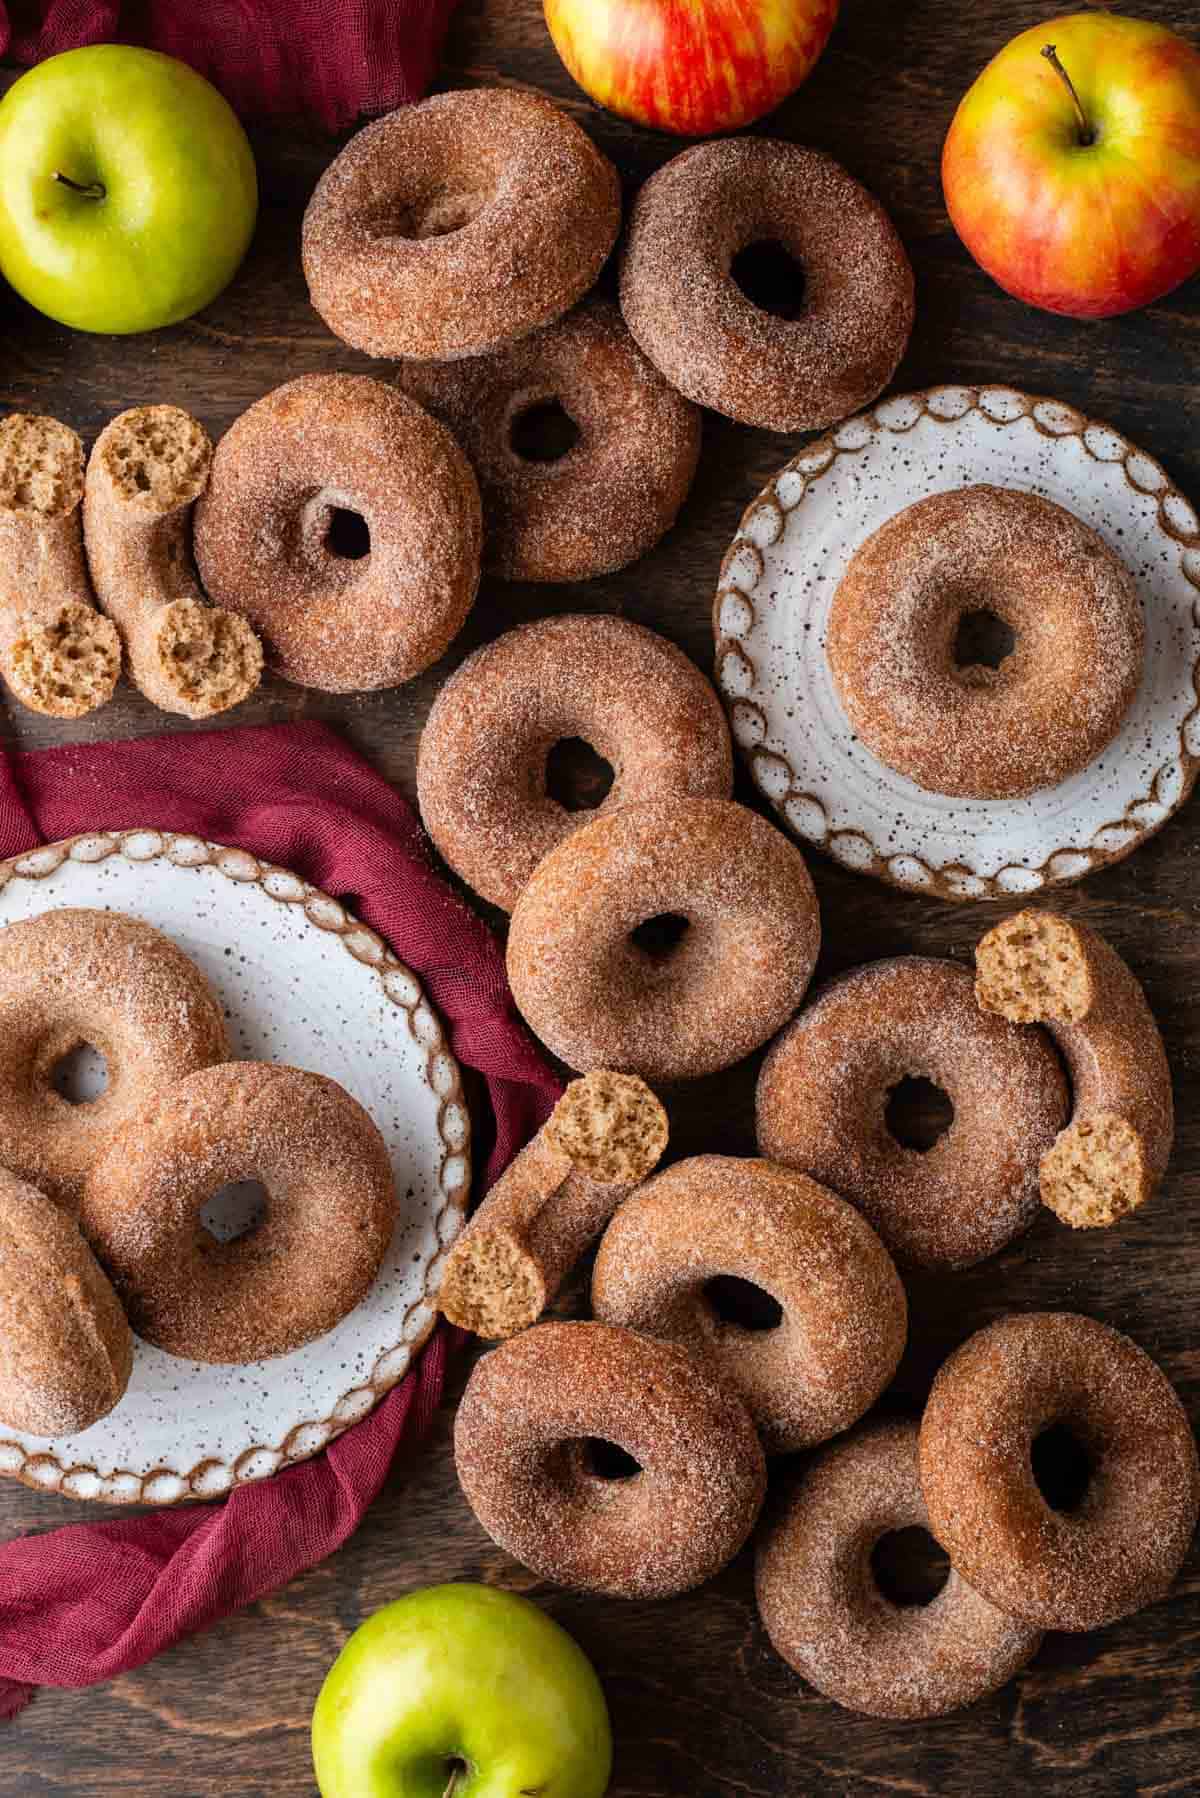 apple cider donuts scattered around on a wooden surface, some on top different white plates, some in halves and some whole, with whole apples and a maroon towel